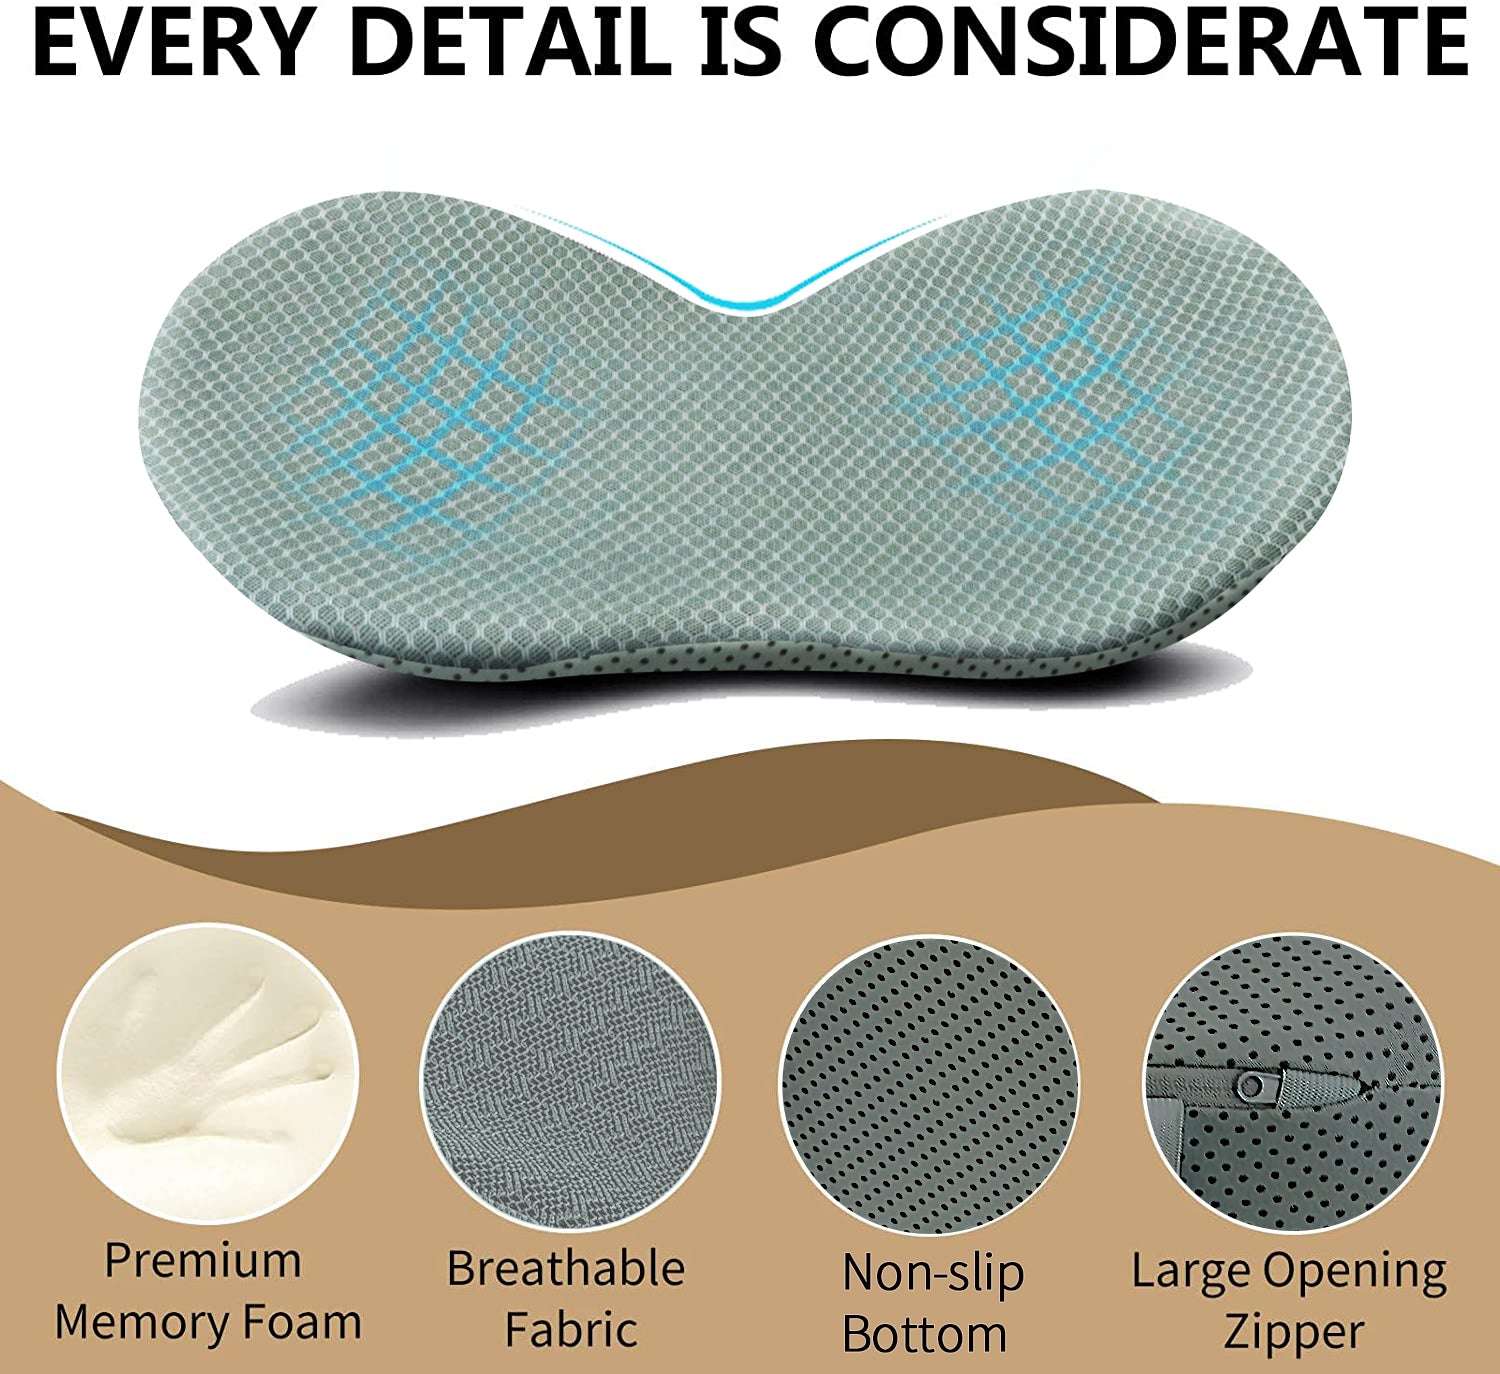 This $40 memory foam cushion from  will make your car rides